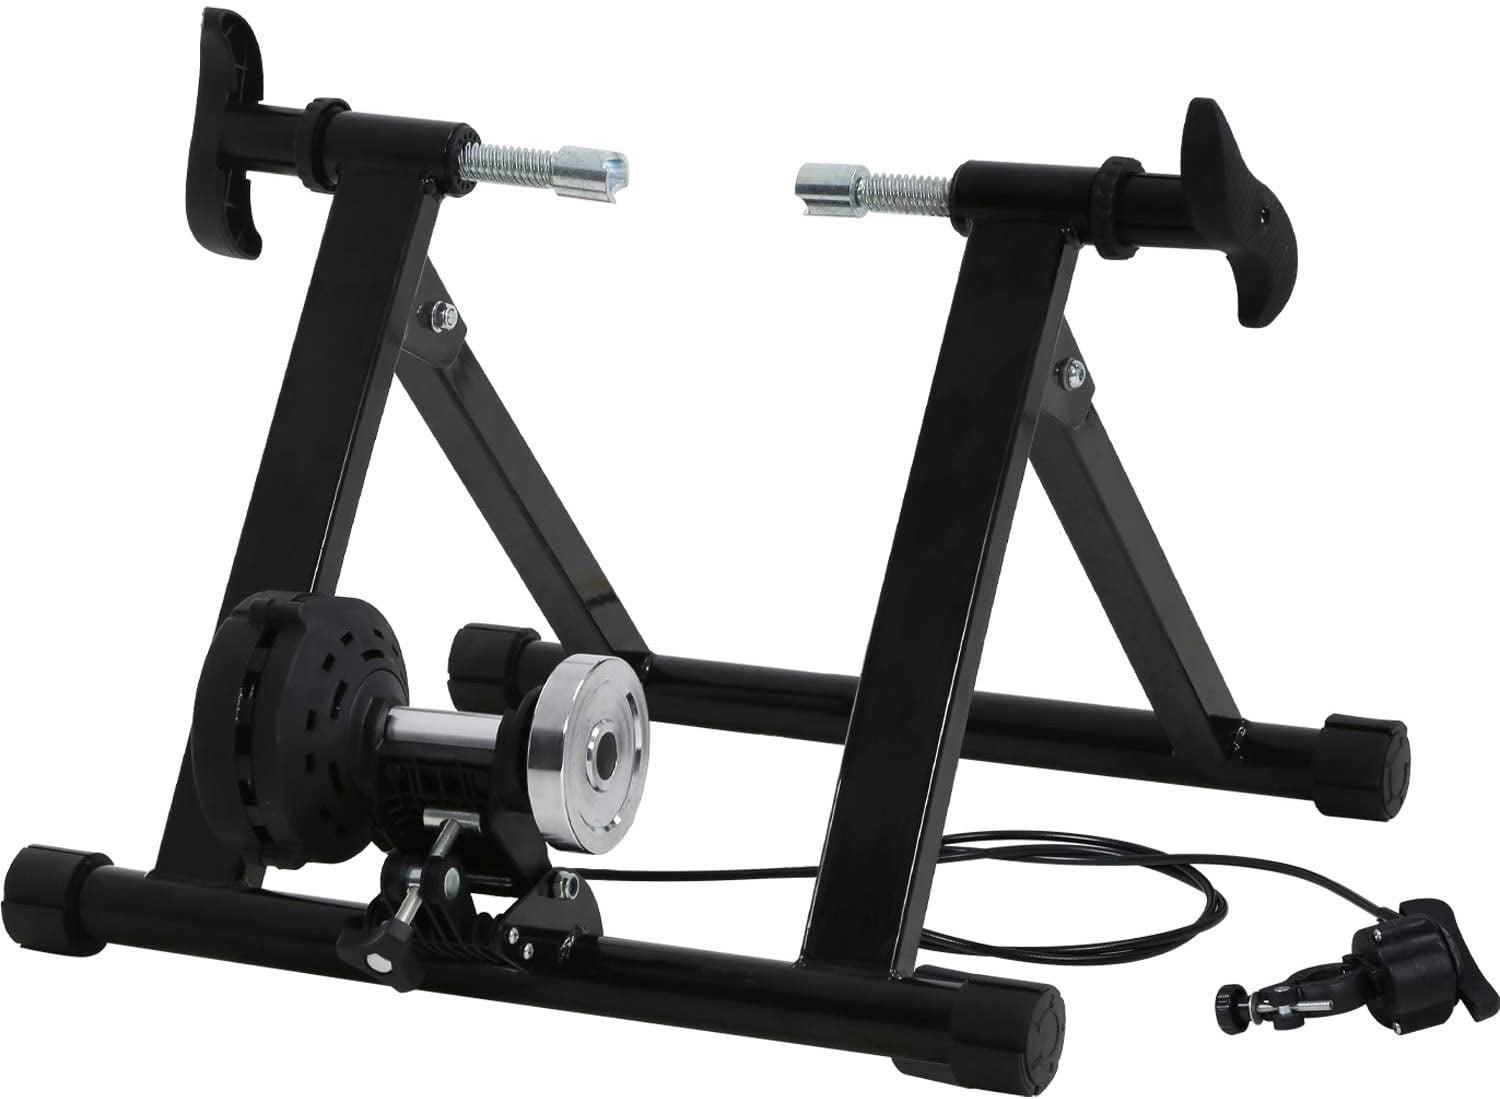 5 Level Resistance Magnetic Indoor Bicycle Bike Trainer Exercise Stand Black. 